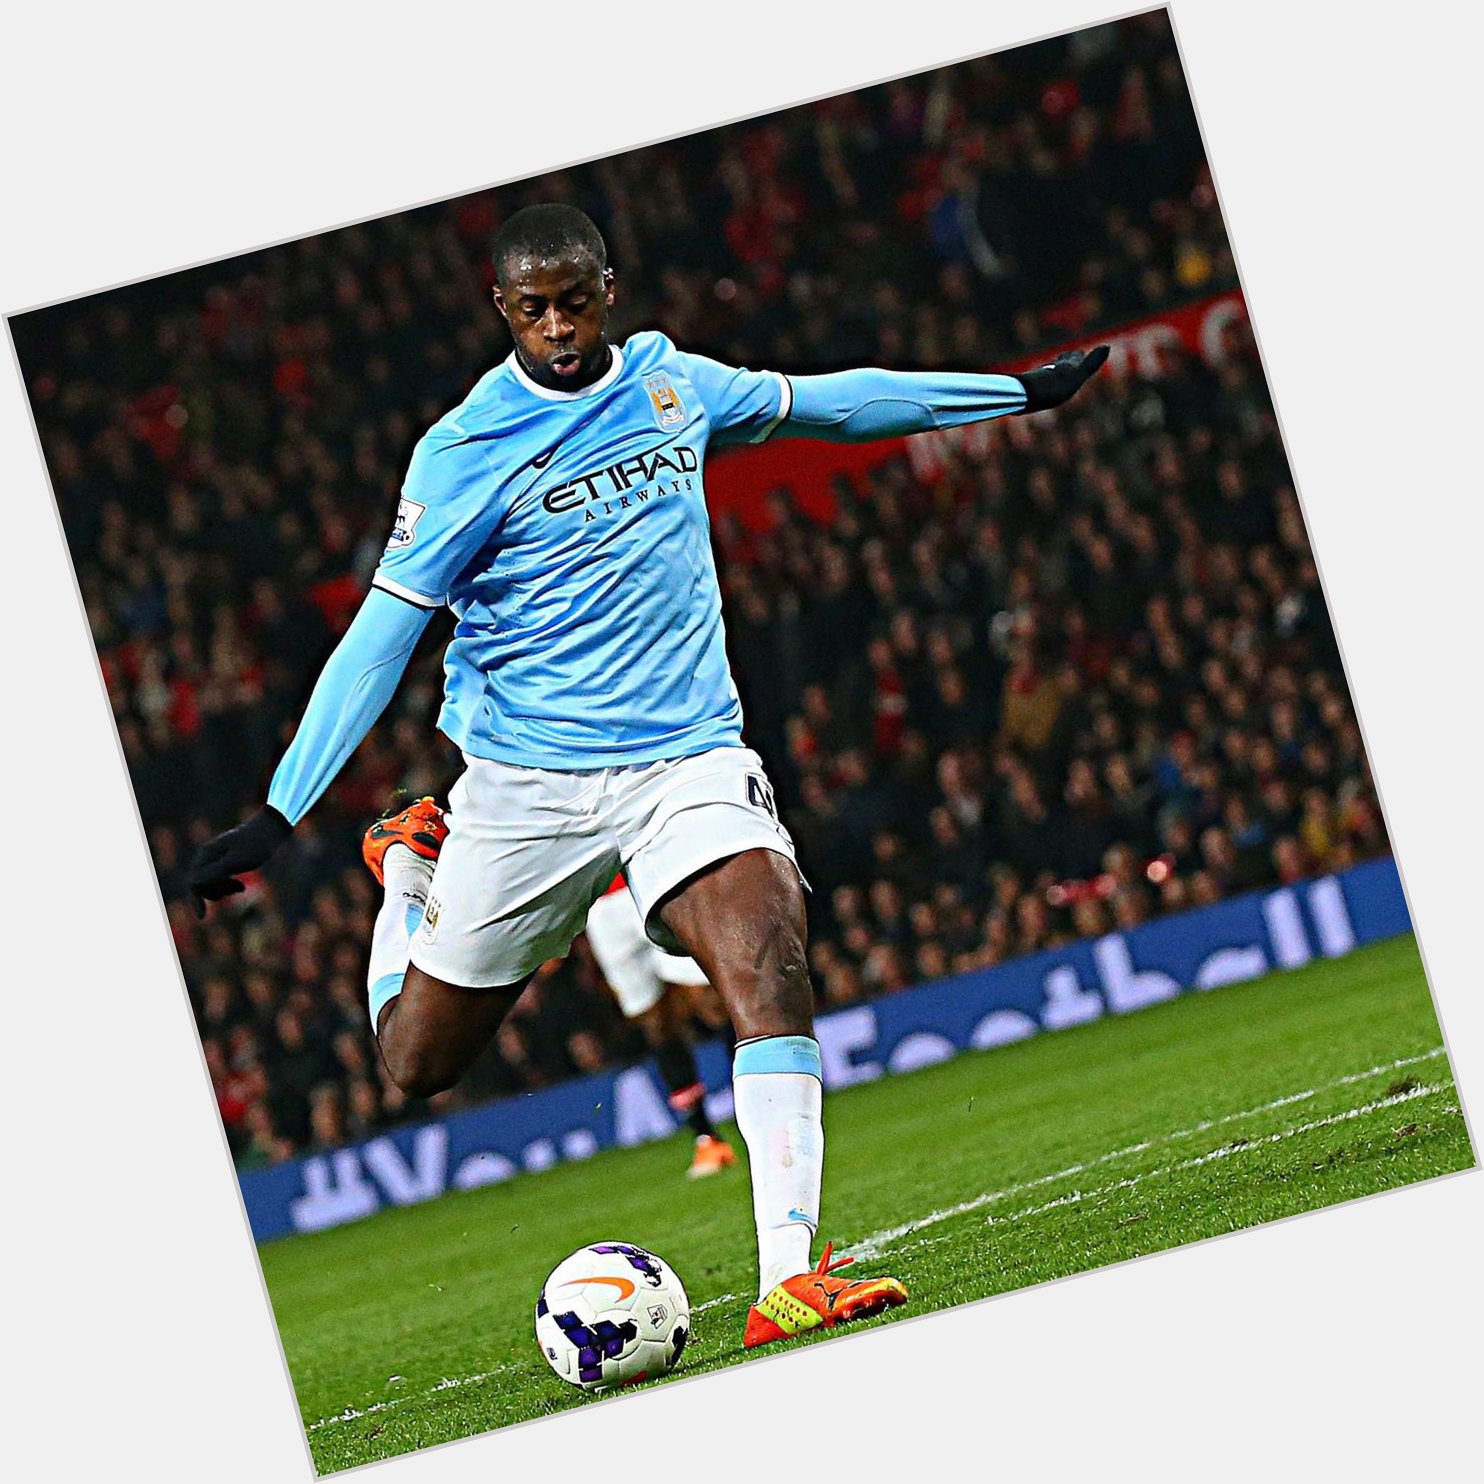 Happy Birthday, Yaya Touré This guy was ridiculously good. 